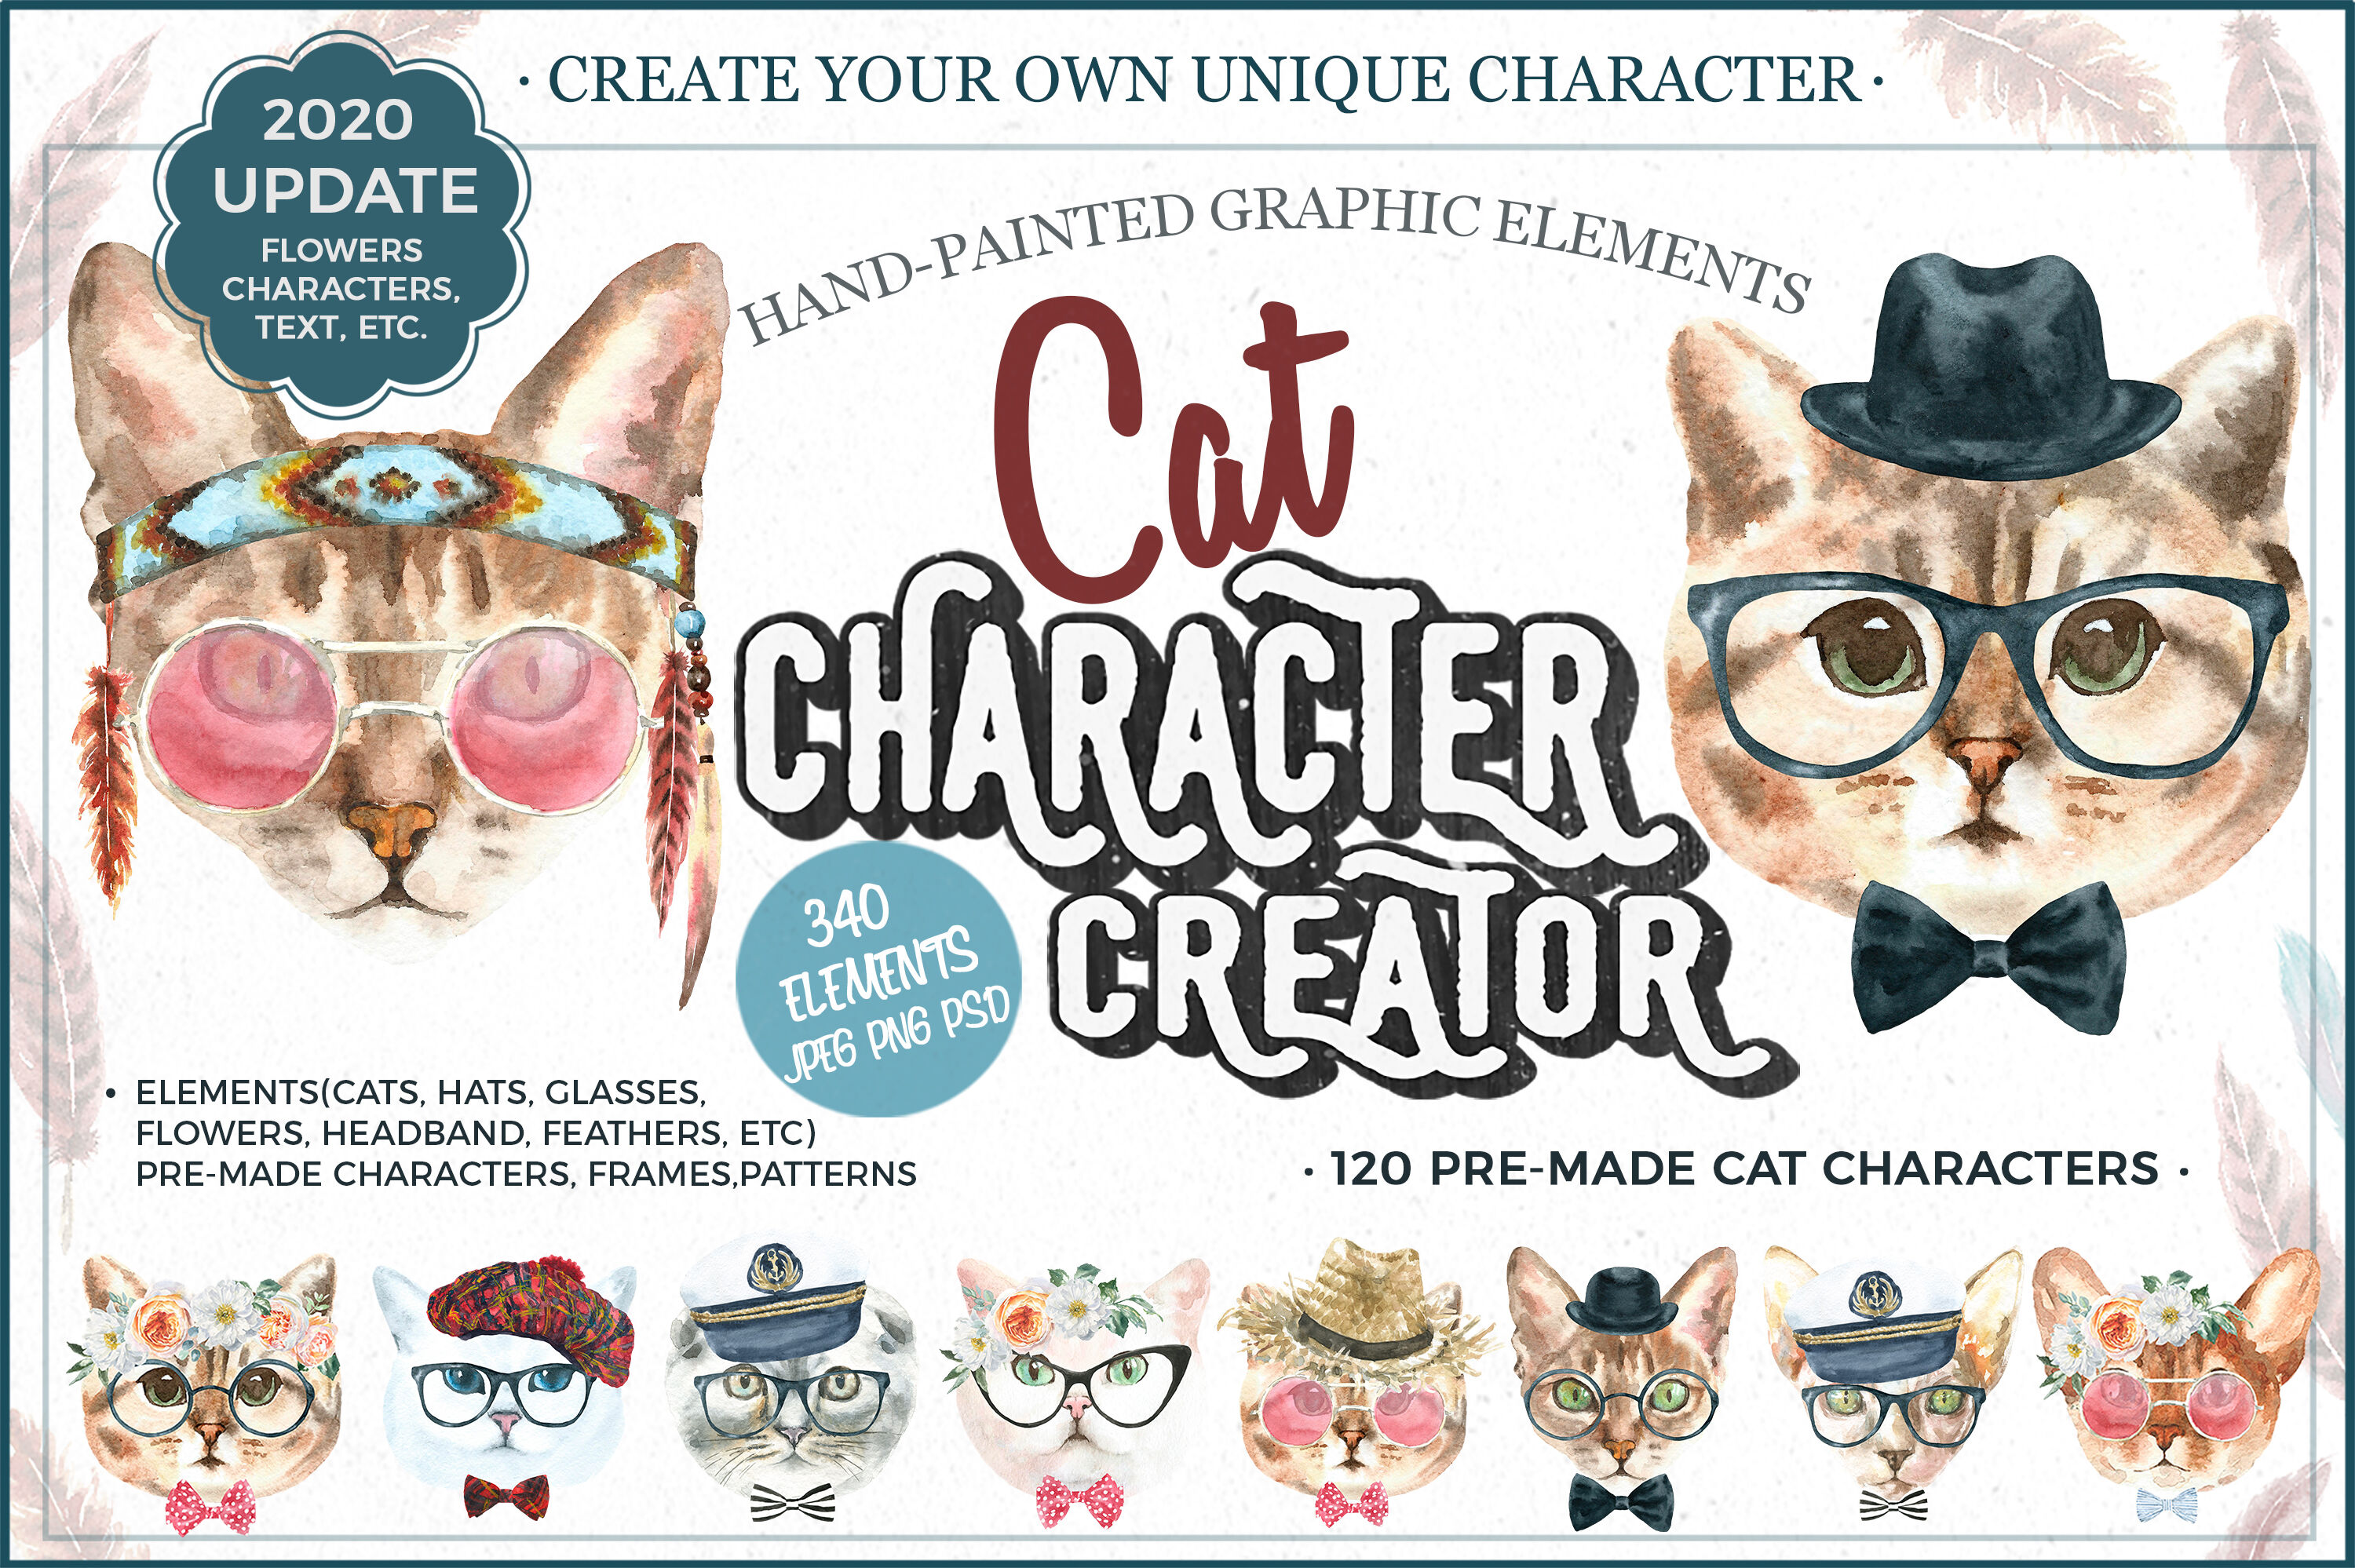 Watercolor Cat Character Creator Animal Illustration Clipart By Catherine Wheel Thehungryjpeg Com